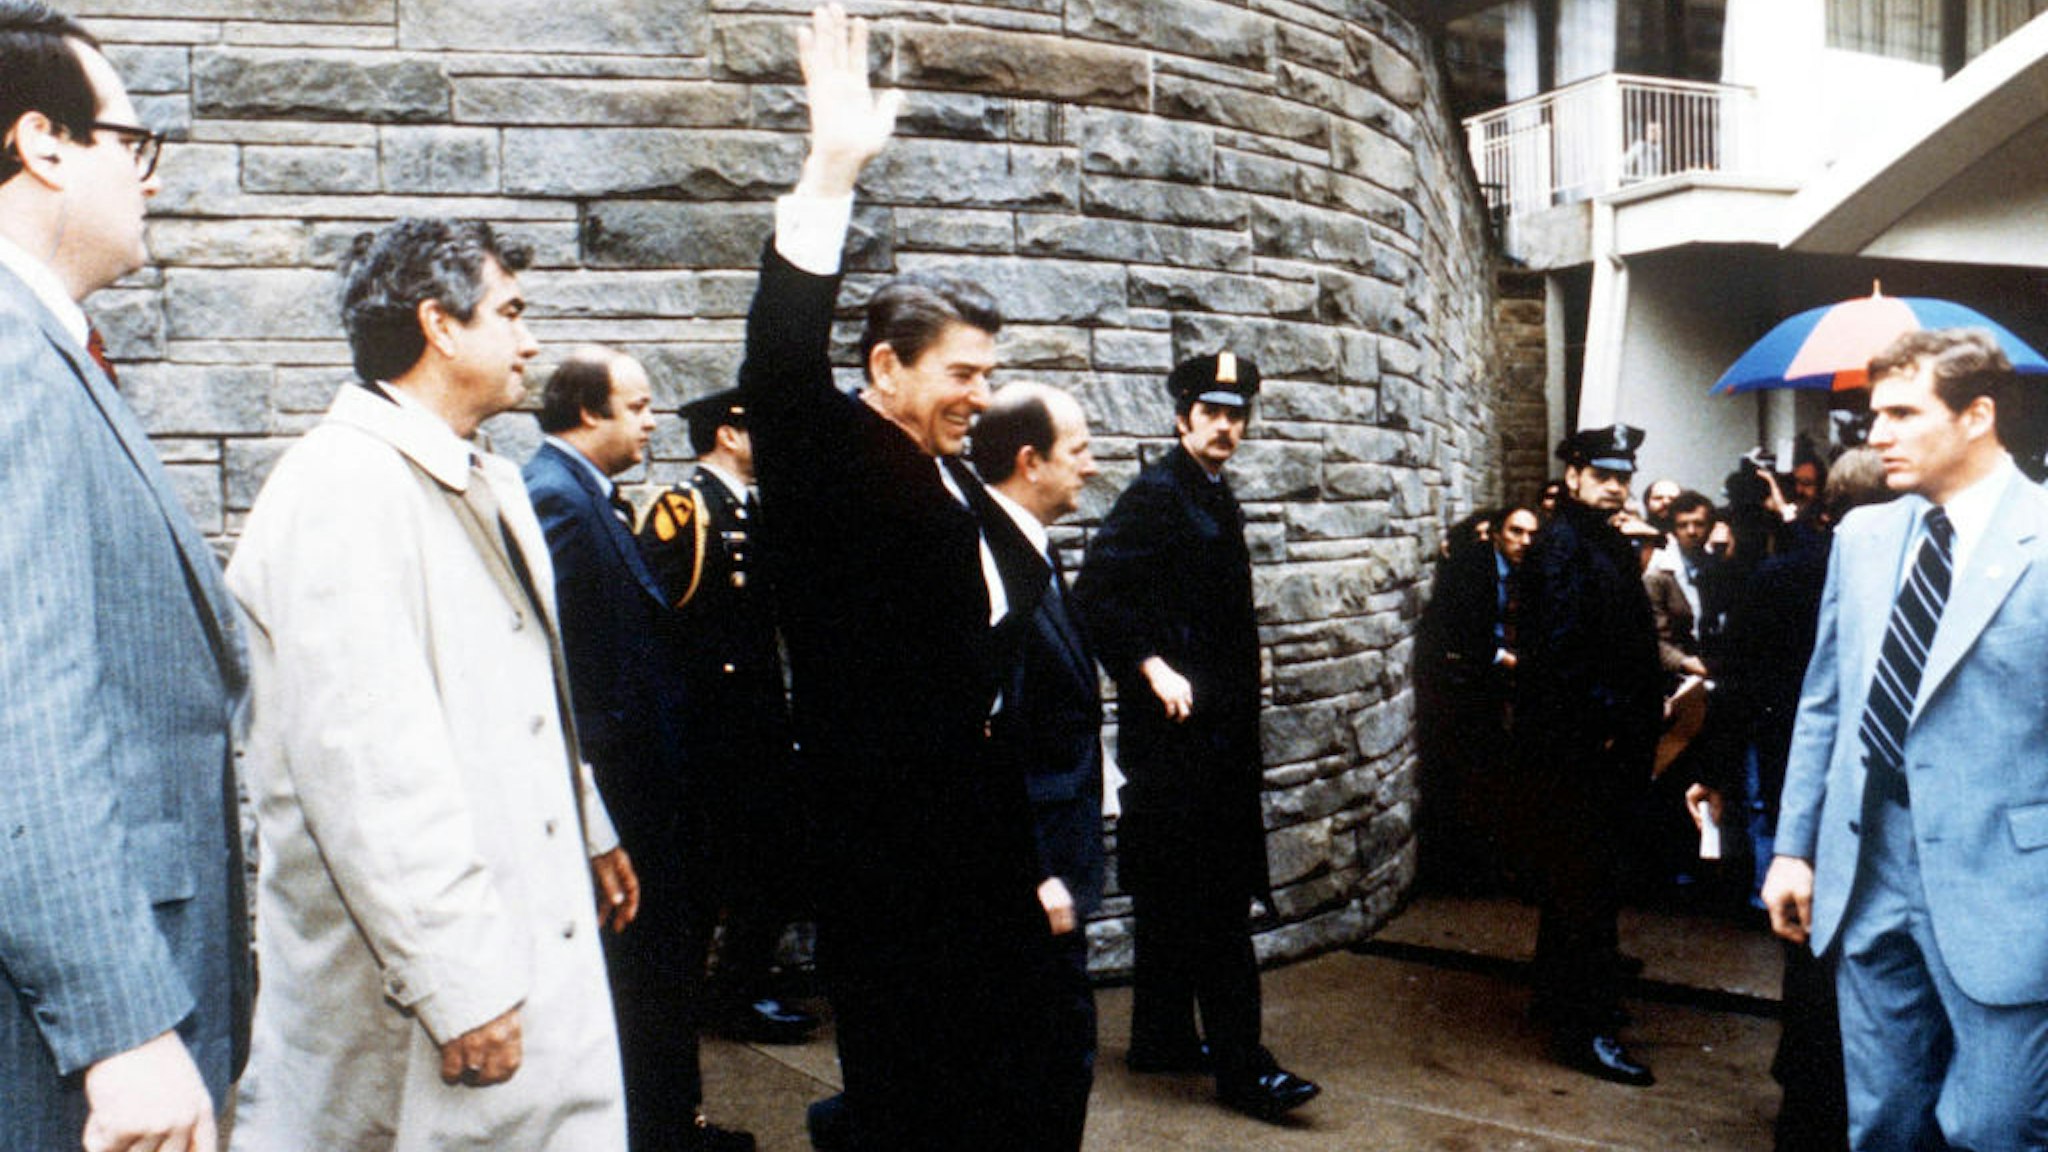 President Ronald Reagan Waves To Onlookers Moments Before An Assassination Attempt